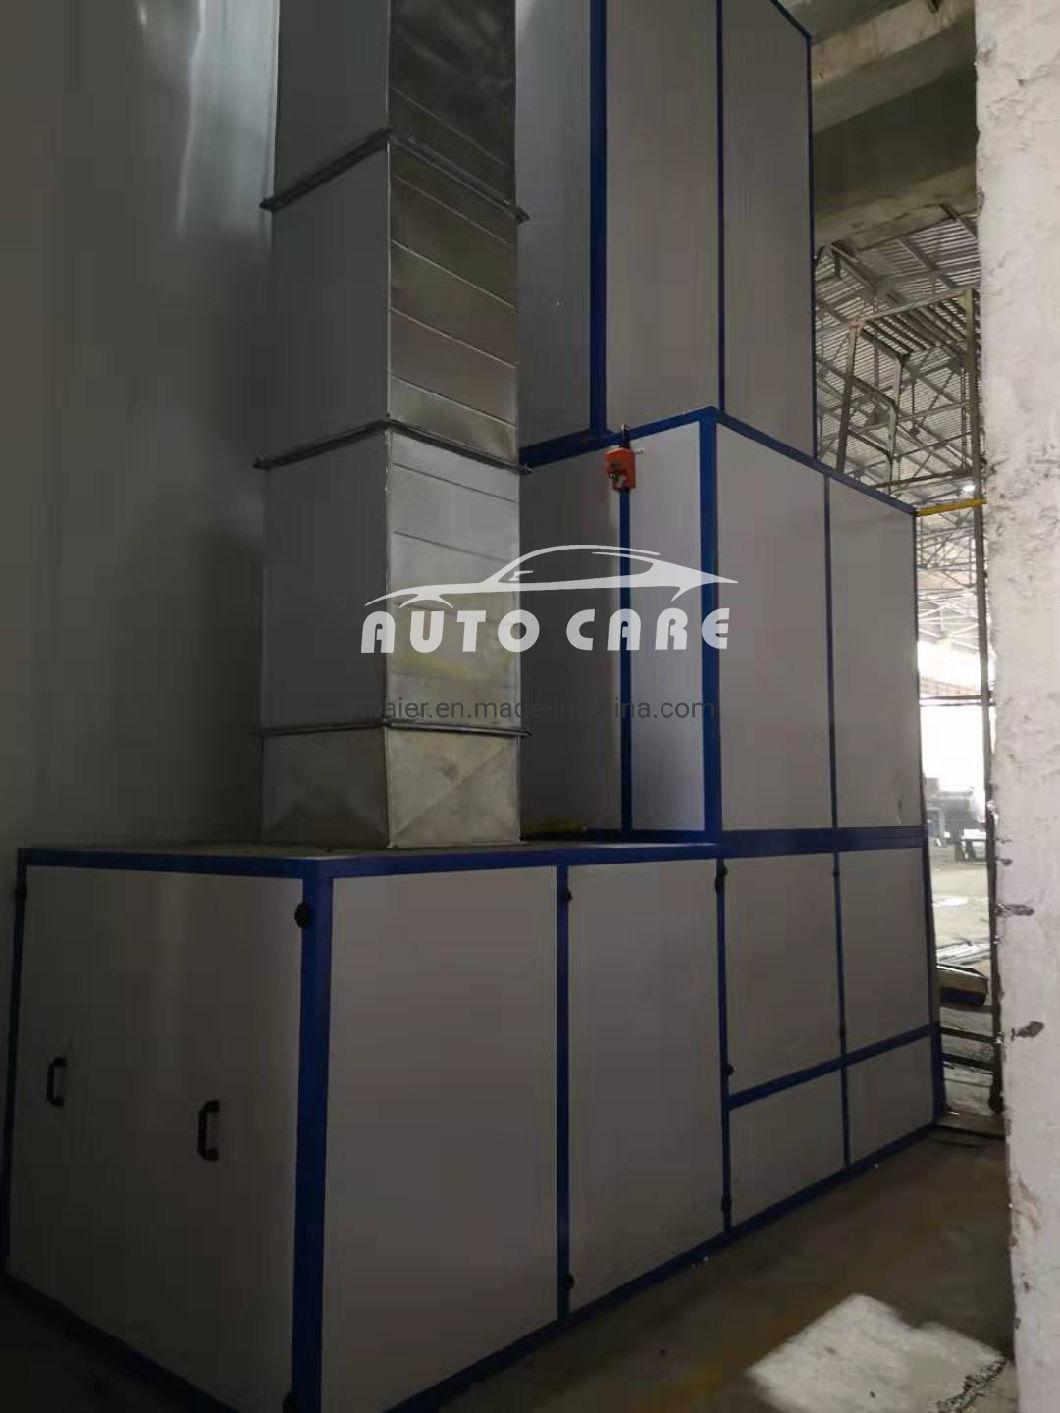 Autocare Powder Coating Van Bus Truck Spray Paint Booth